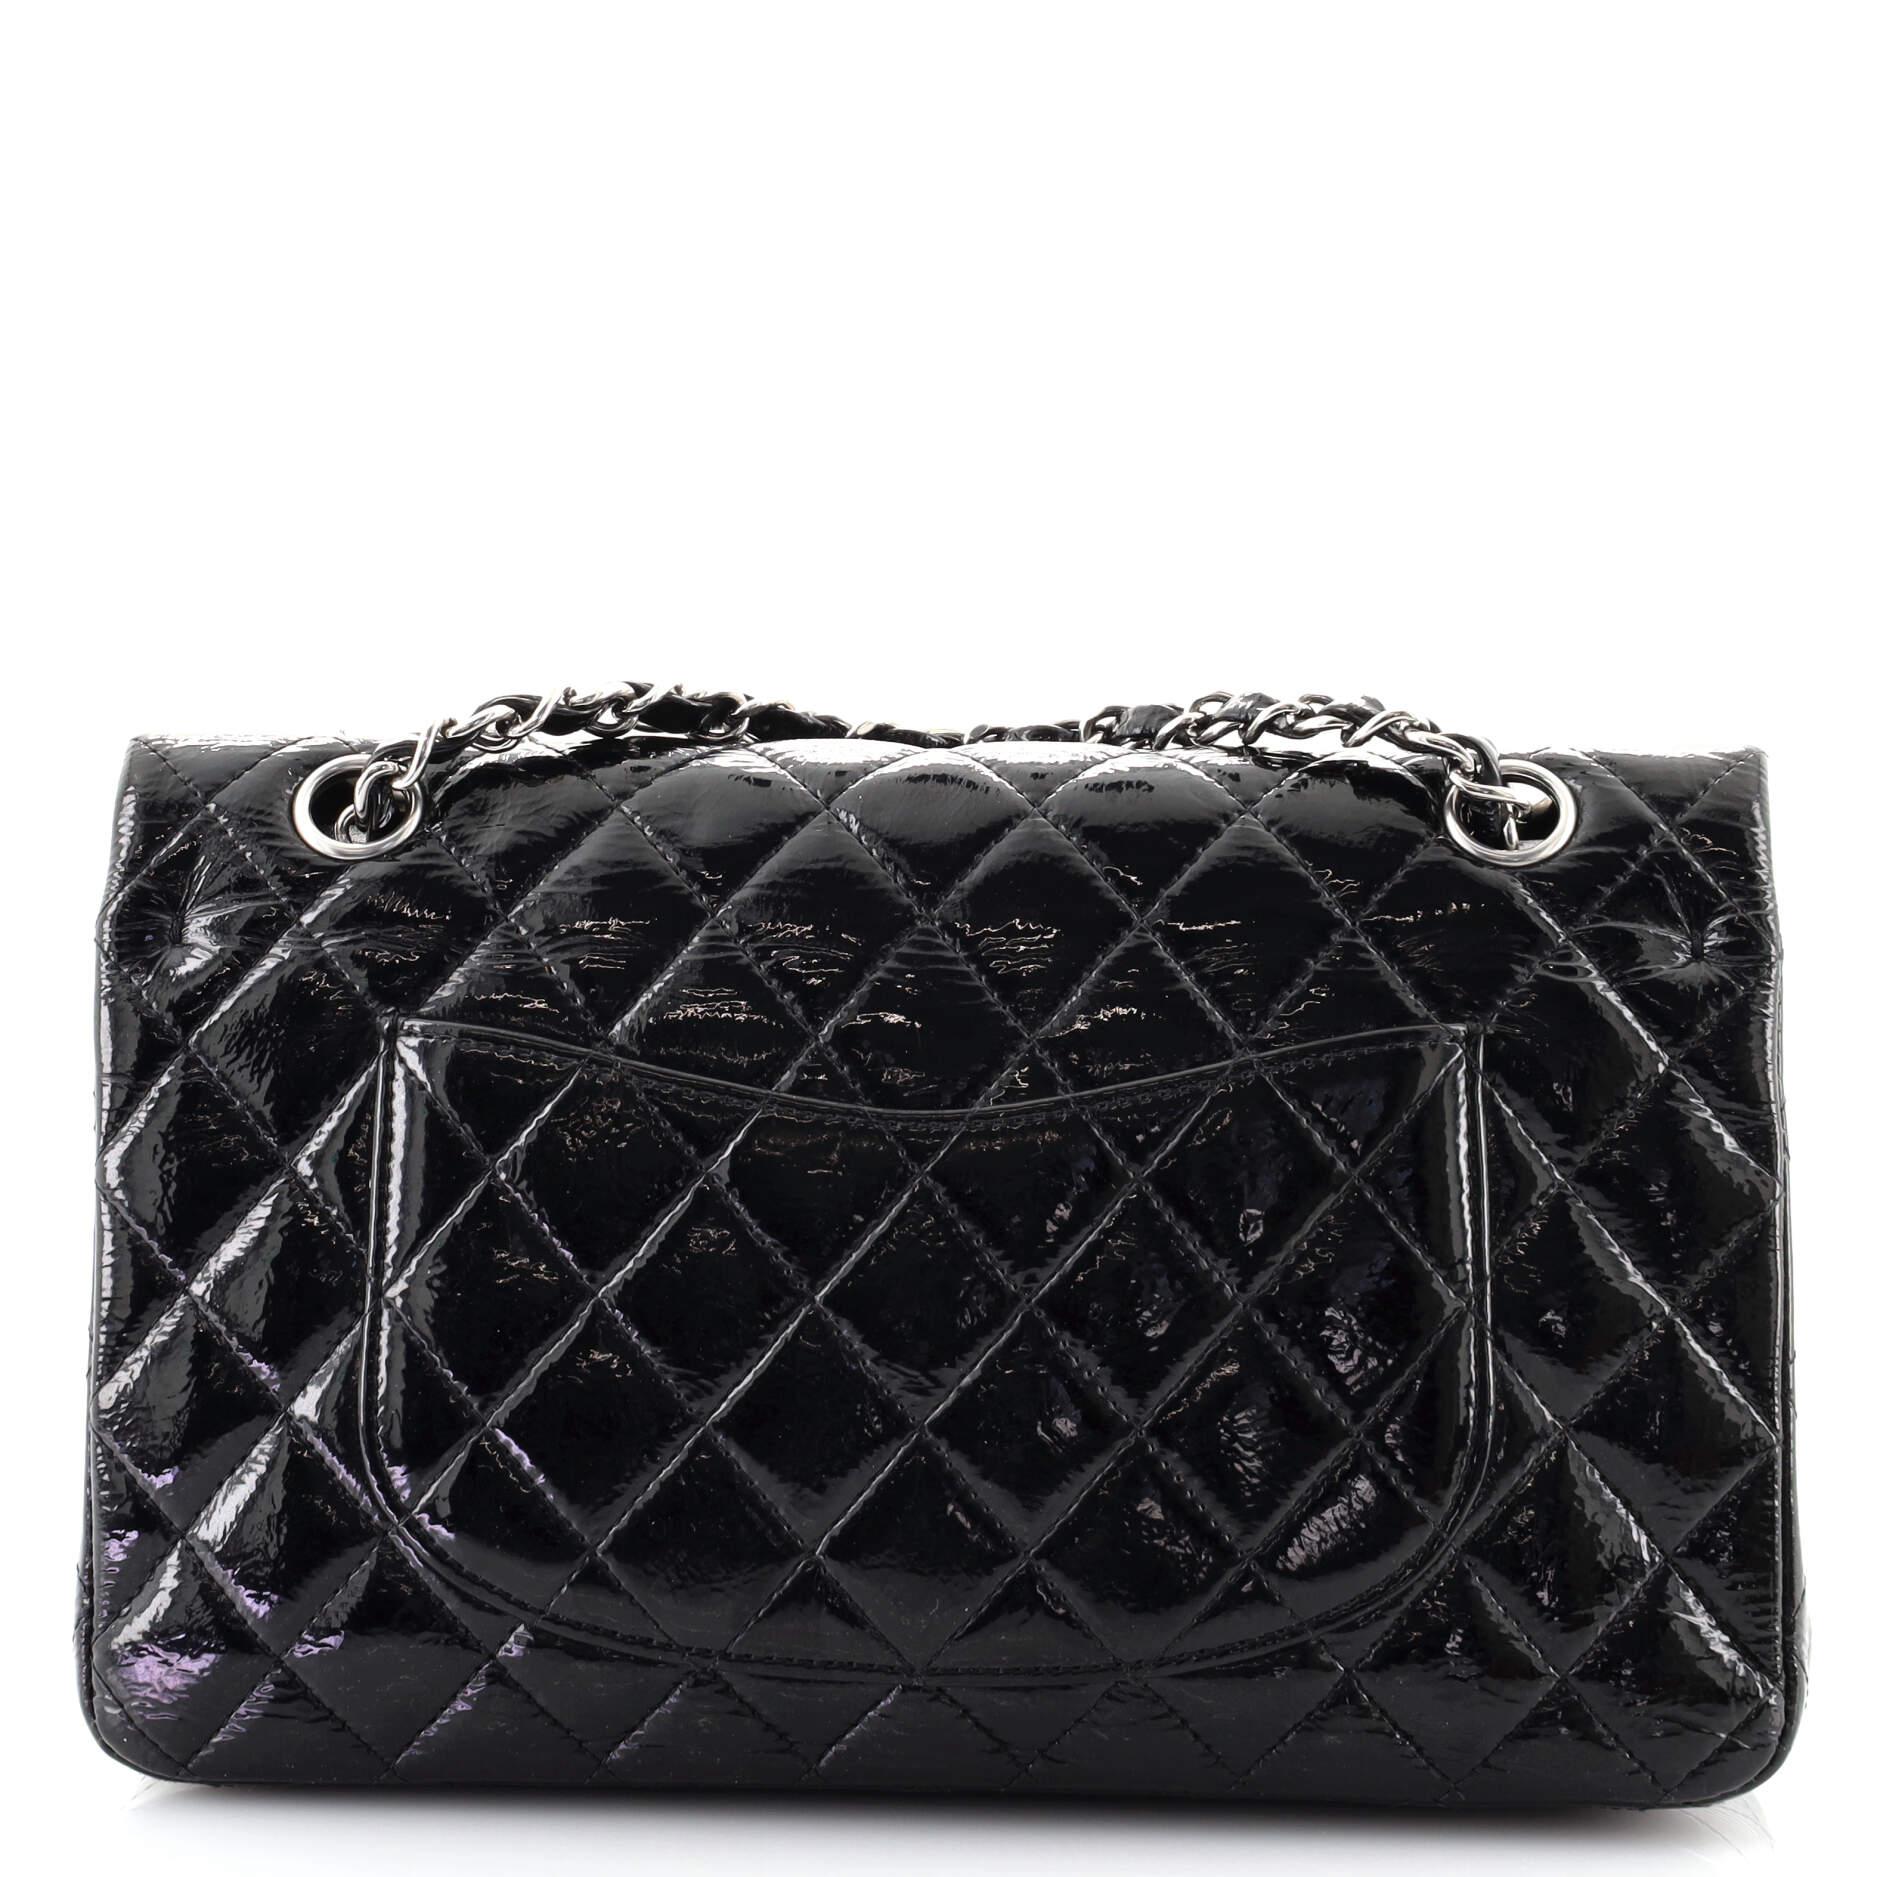 Black Chanel Classic Double Flap Bag Quilted Patent Medium